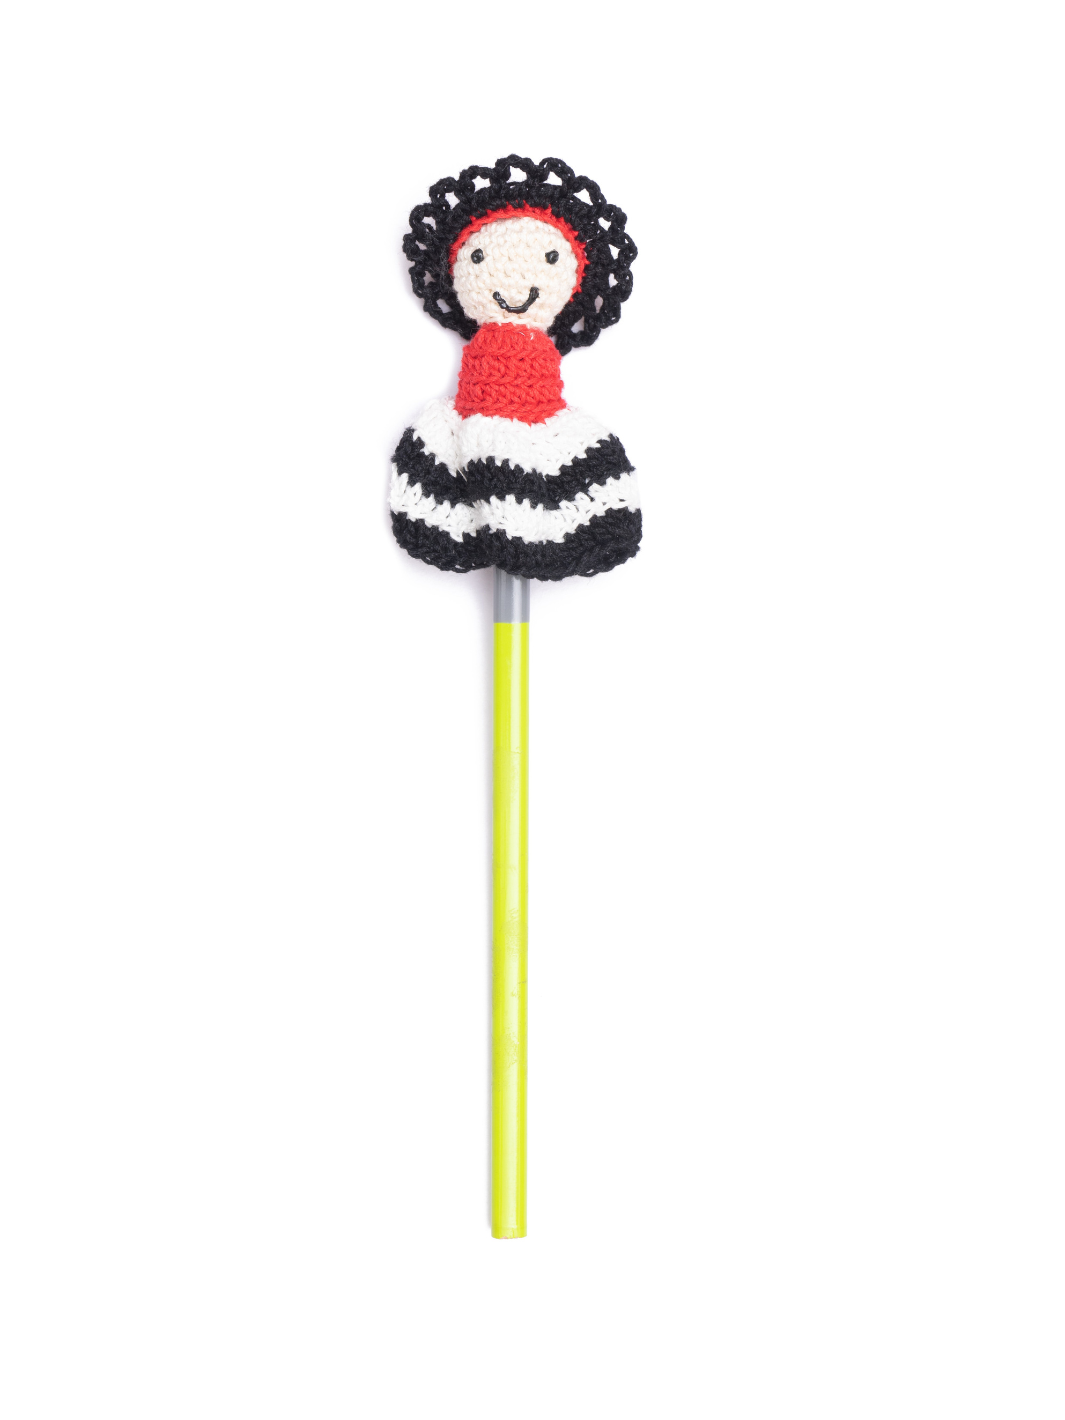 Adorable handcrafted Red doll Pencil Topper